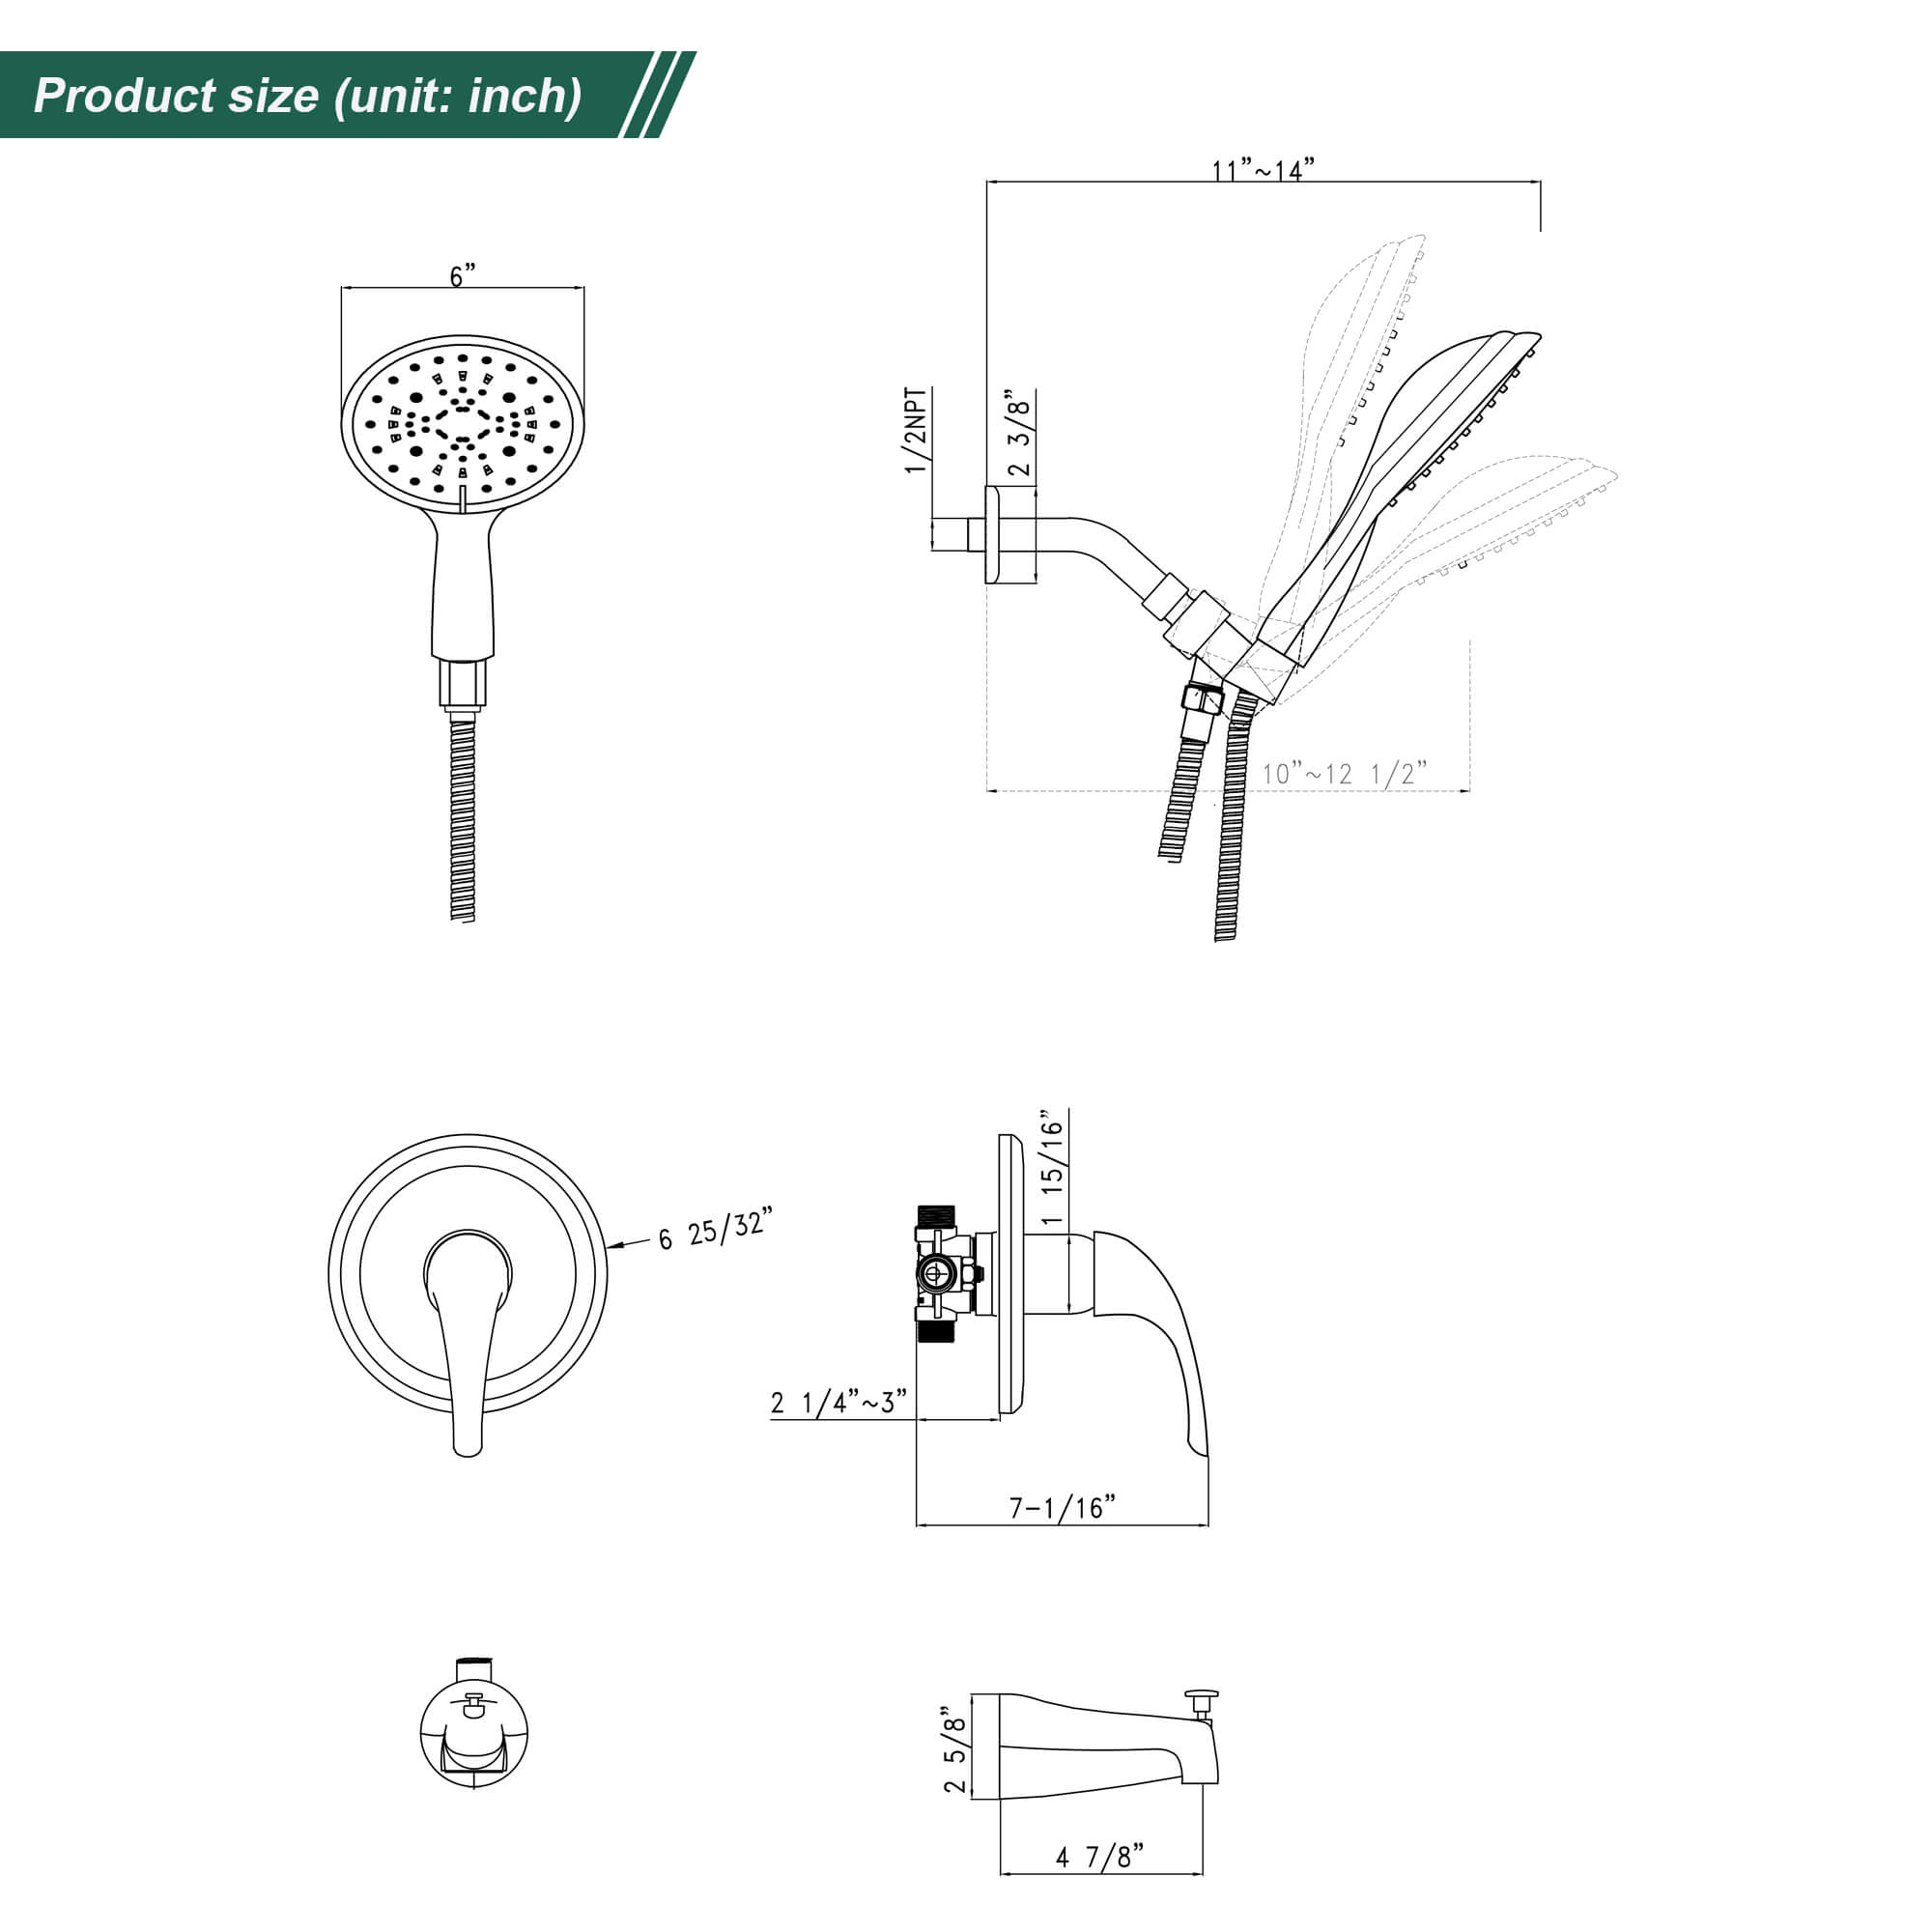 AIHOM Dual-Function Shower Faucet Set With Valve